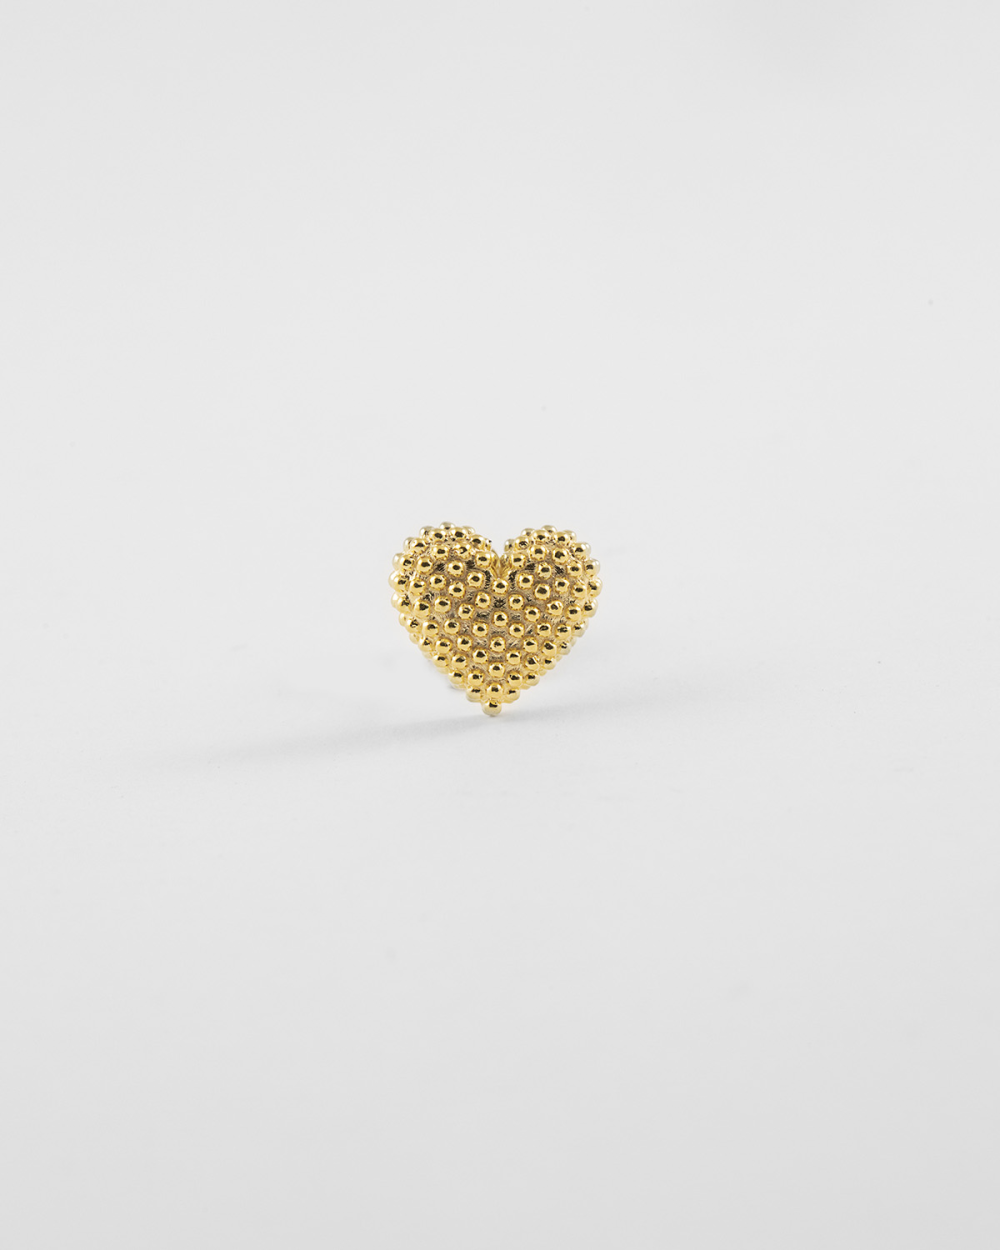 DOTTED HEART SINGLE LOBE EARRING / POLISHED YELLOW GOLD